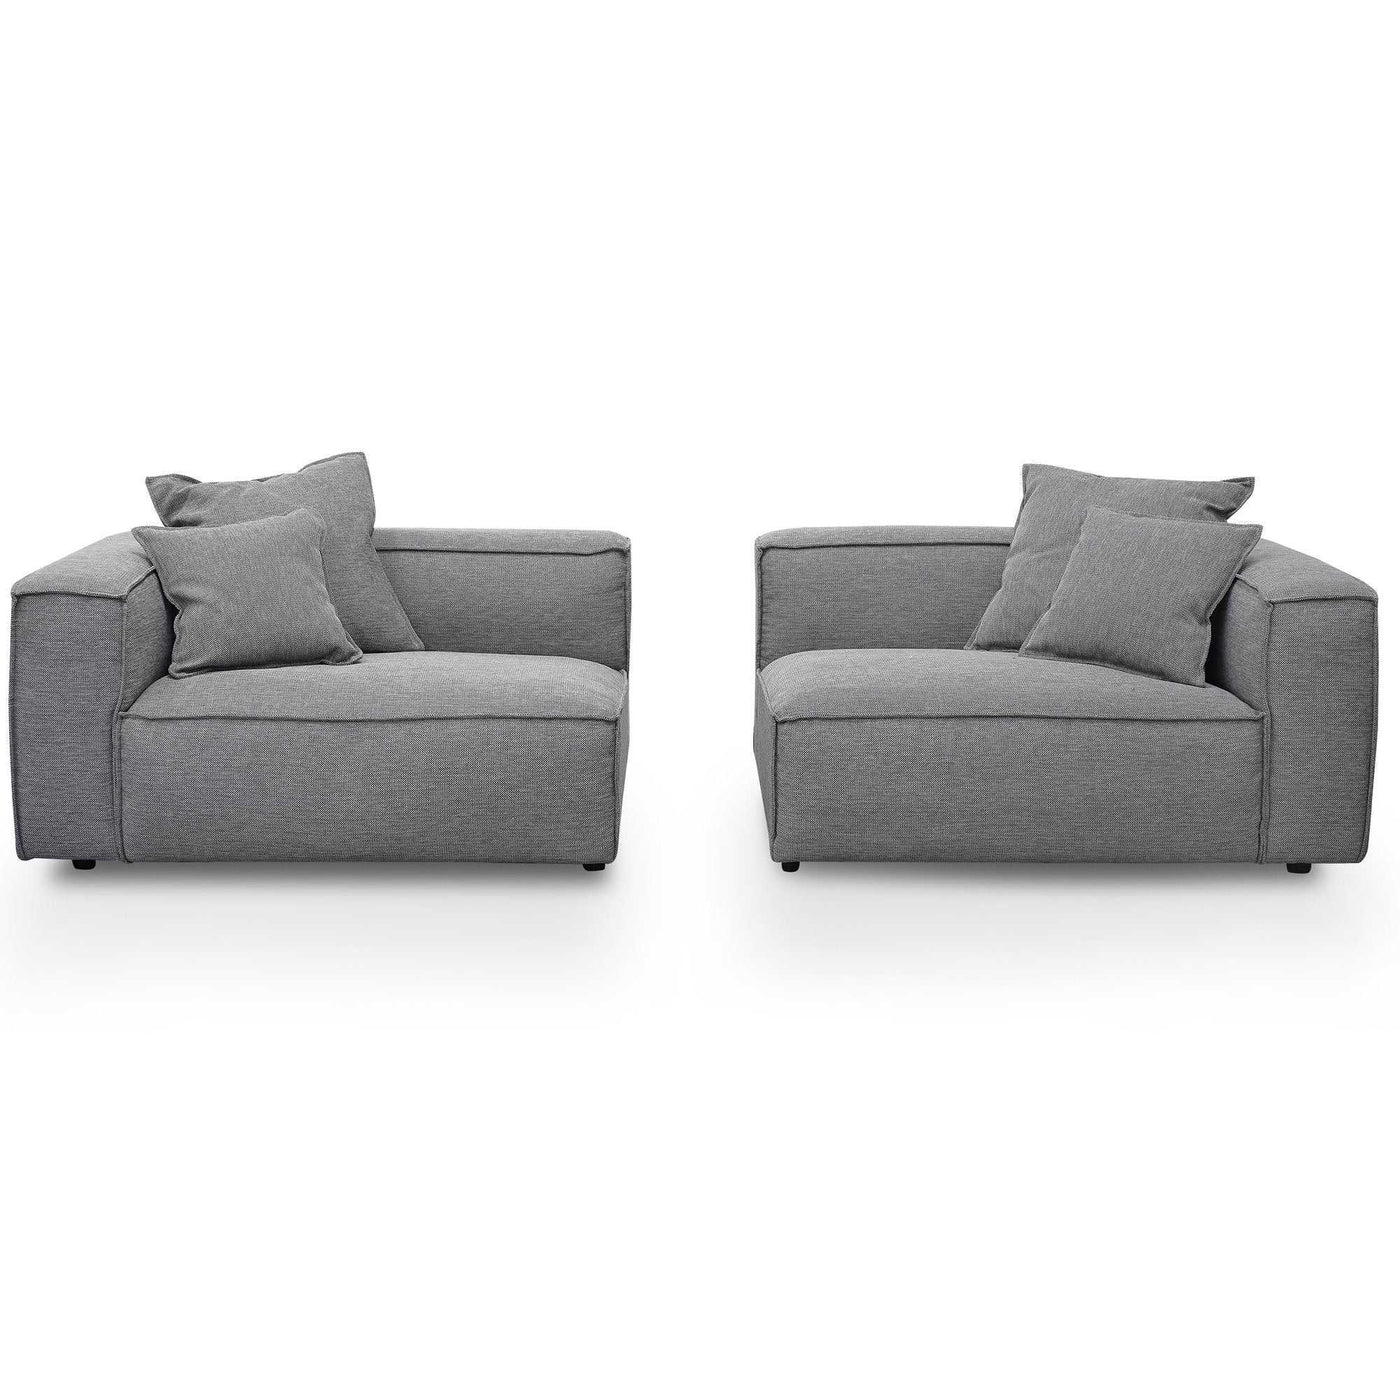 3 Seater Sofa with Cushion and Pillow - Graphite Grey